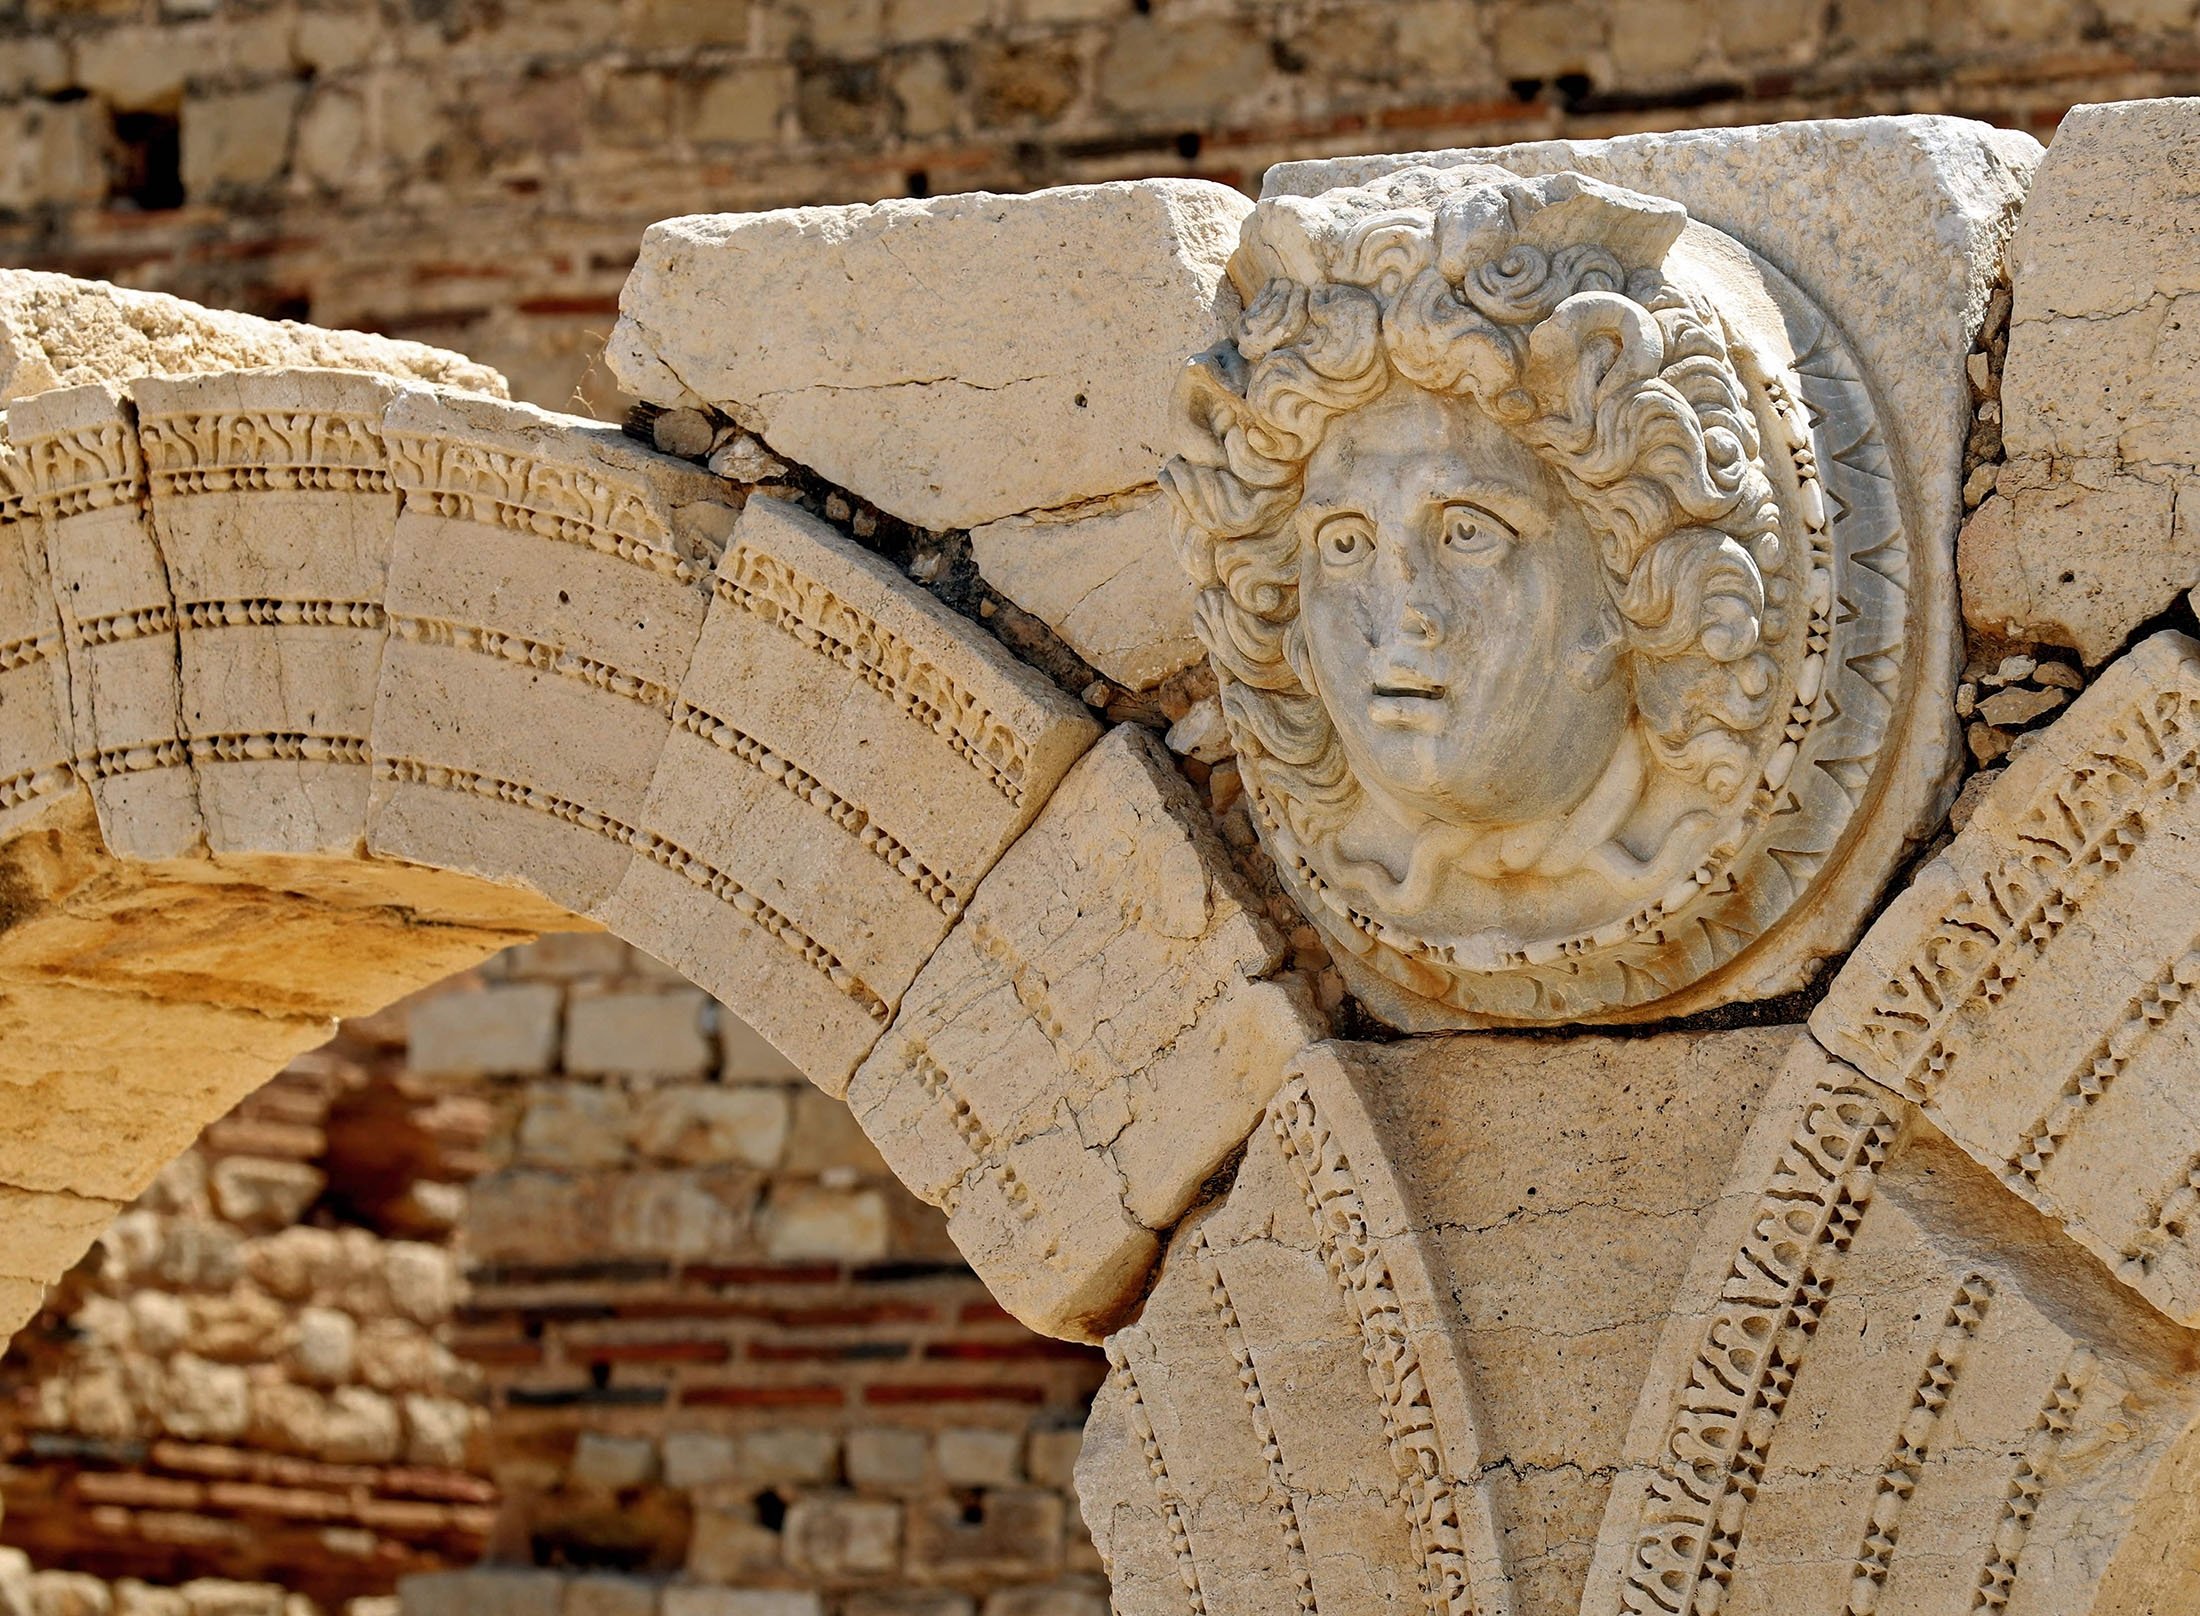 A carved Gorgon head on arches surrounding the Severin forum, in the ancient Roman city of Leptis Magna near the coastal city of al-Khums, Libya, Aug. 24, 2021. (AFP Photo)